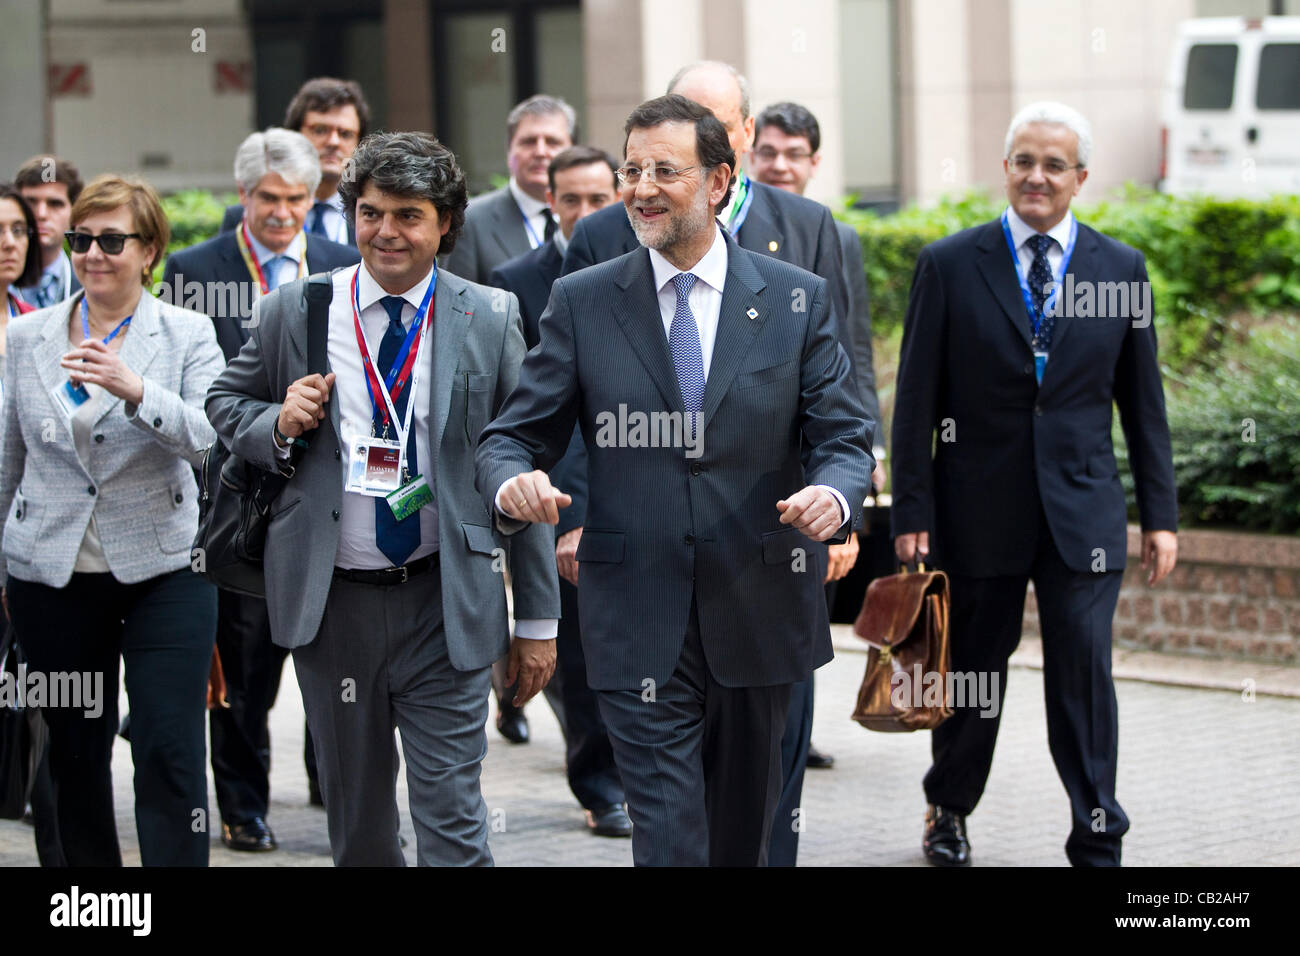 European Council, Brussels, Belgium. 23.05.2012 Picture shows Mariano Rajoy Brey (centre with beard), Prime Minister of Spain, arriving at the Informal Dinner of Heads of State or Government for member nations of the EU, Brussels, Belgium. Stock Photo